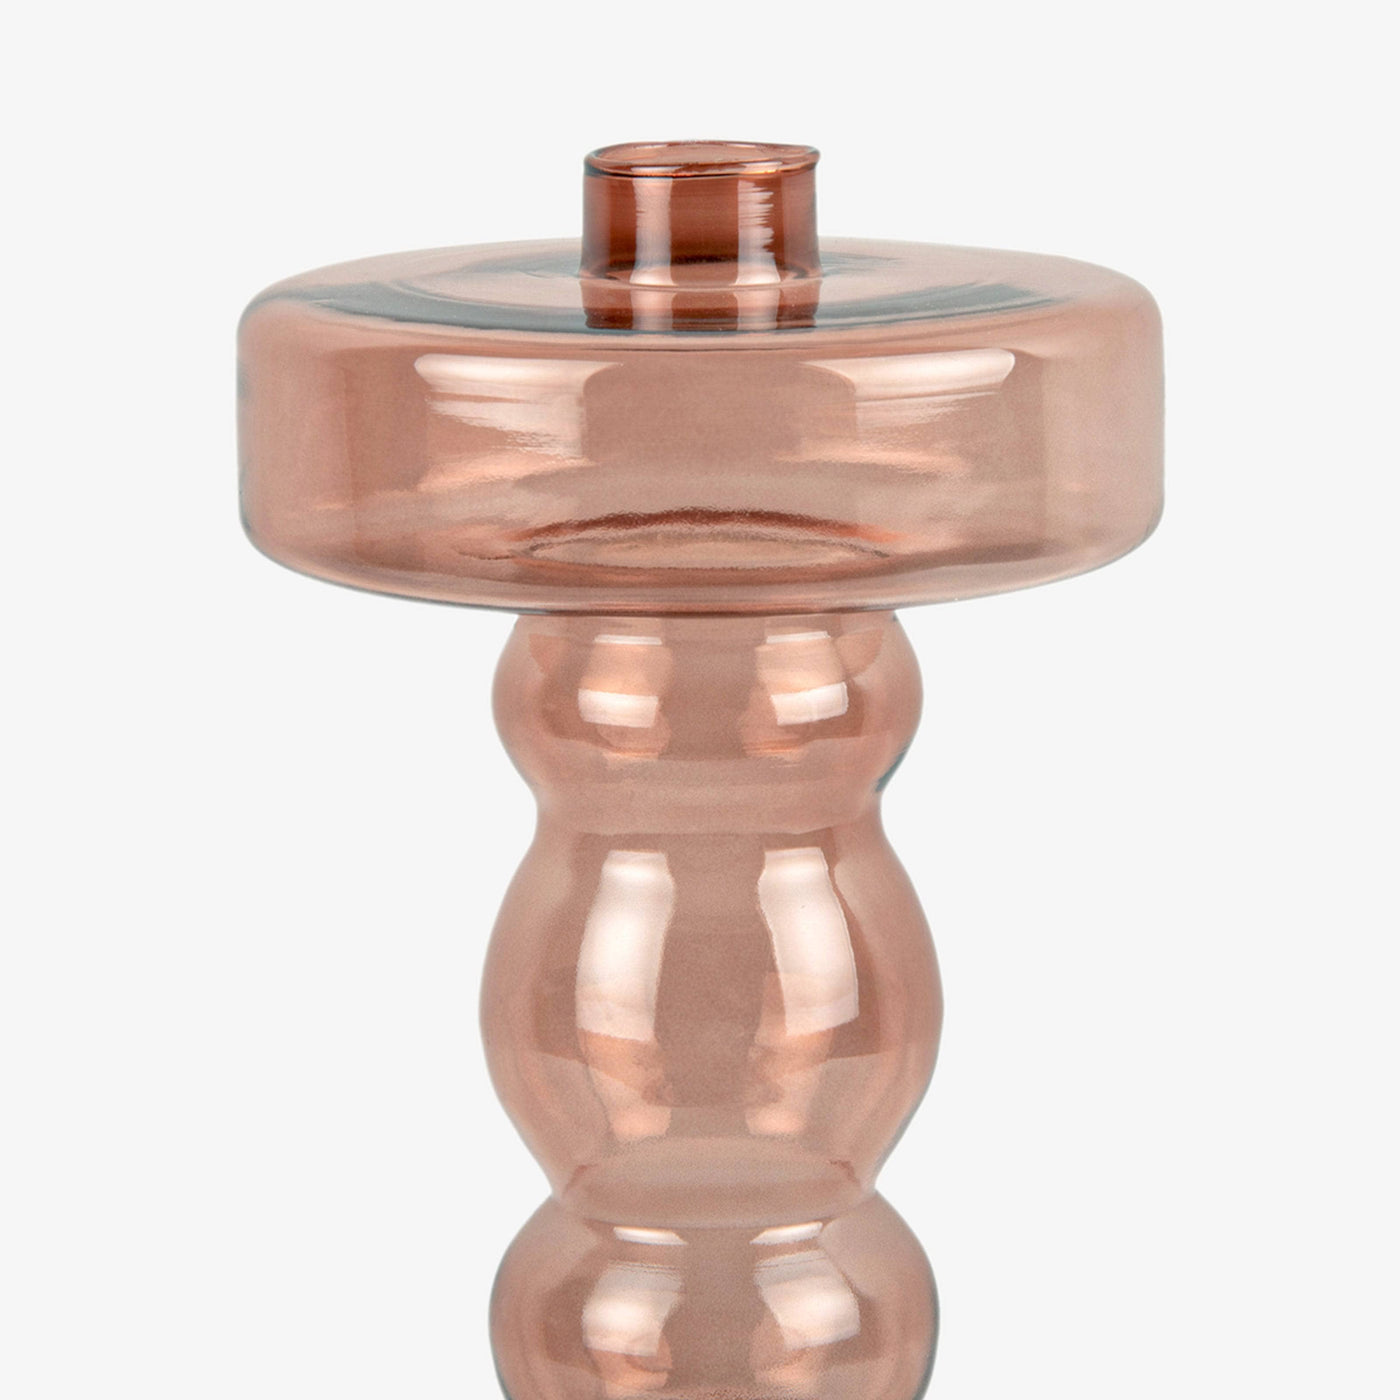 Ludou Candle Holder, Glass, Faded Pink, XL Candle Holders sazy.com